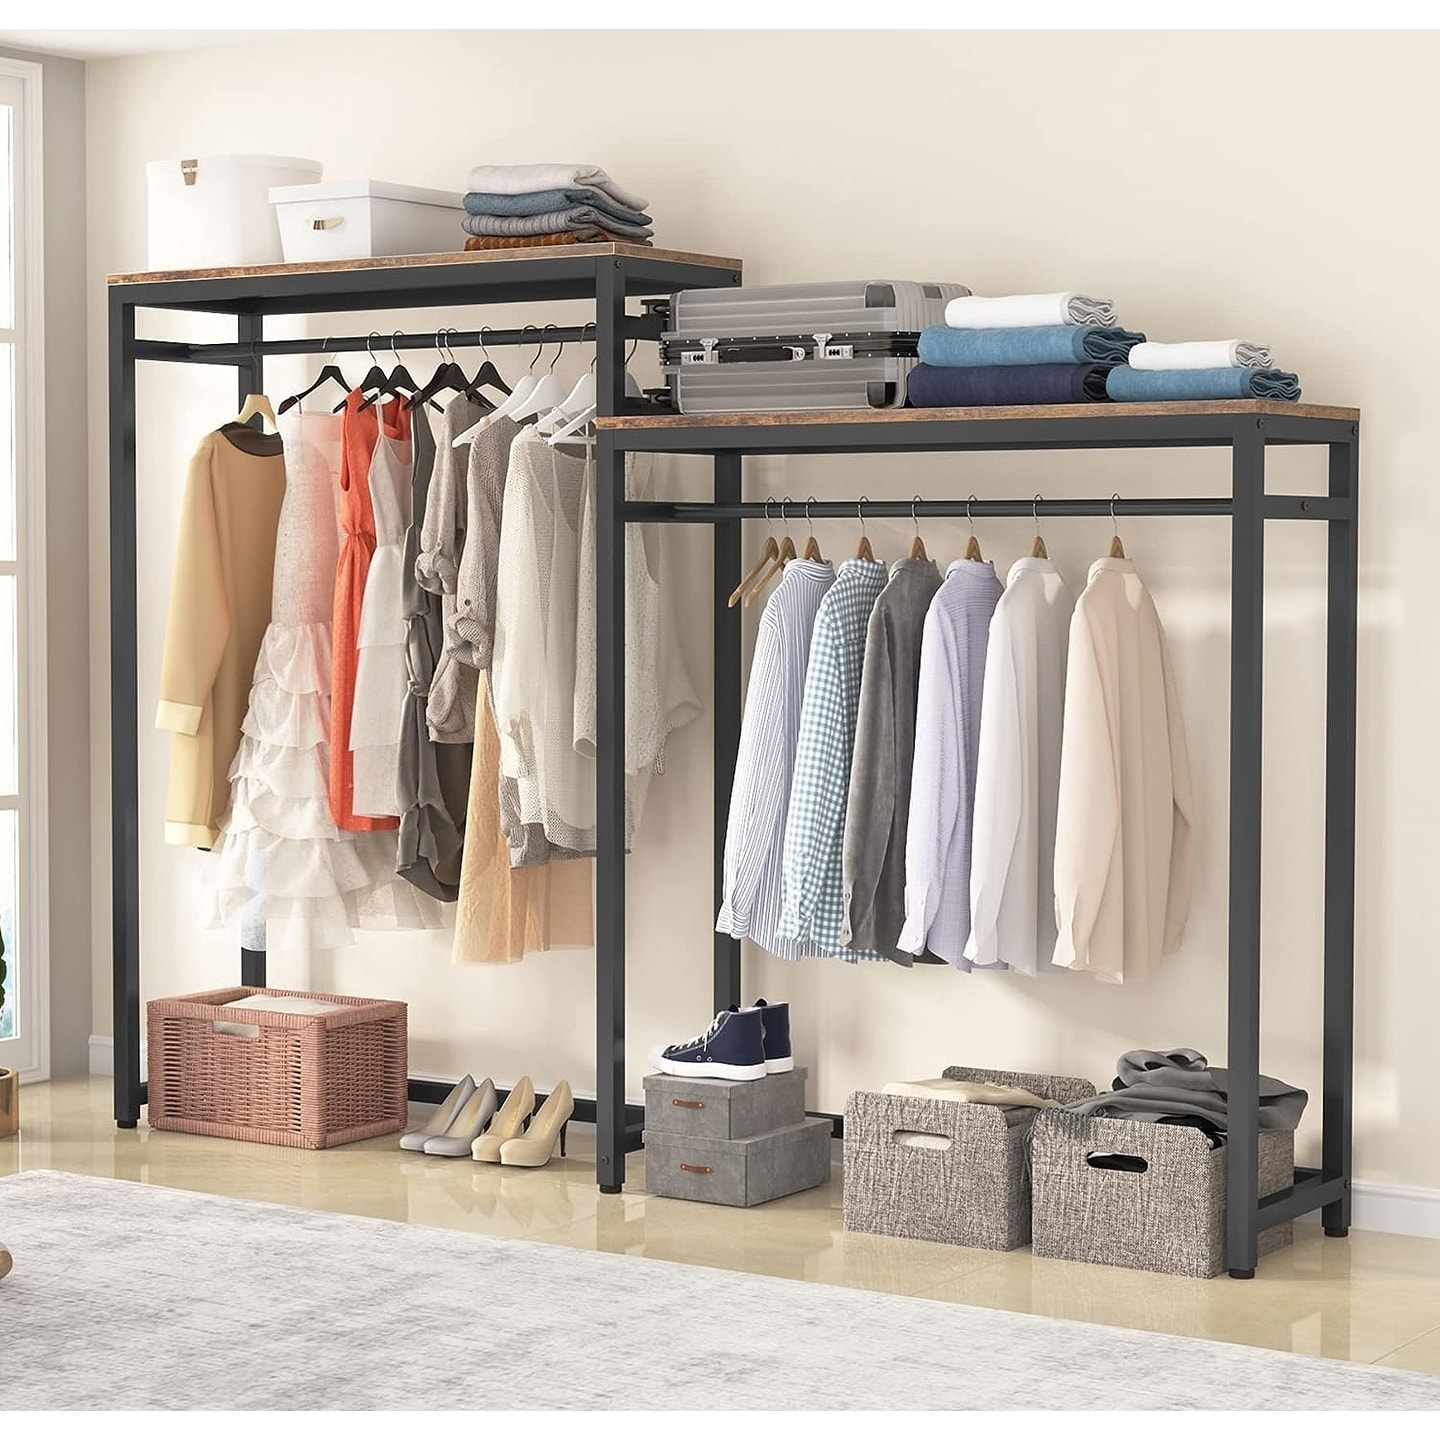 https://ak1.ostkcdn.com/images/products/is/images/direct/cc6360fa3d03fdc31f5ad849253c8393f03536b9/Heavy-Duty-Garment-Racks-Clothes-Rack-with-Storage-Shelves-and-Double-Hanging-Rod%2CMetal-FreeStanding-Closet-Organizer.jpg